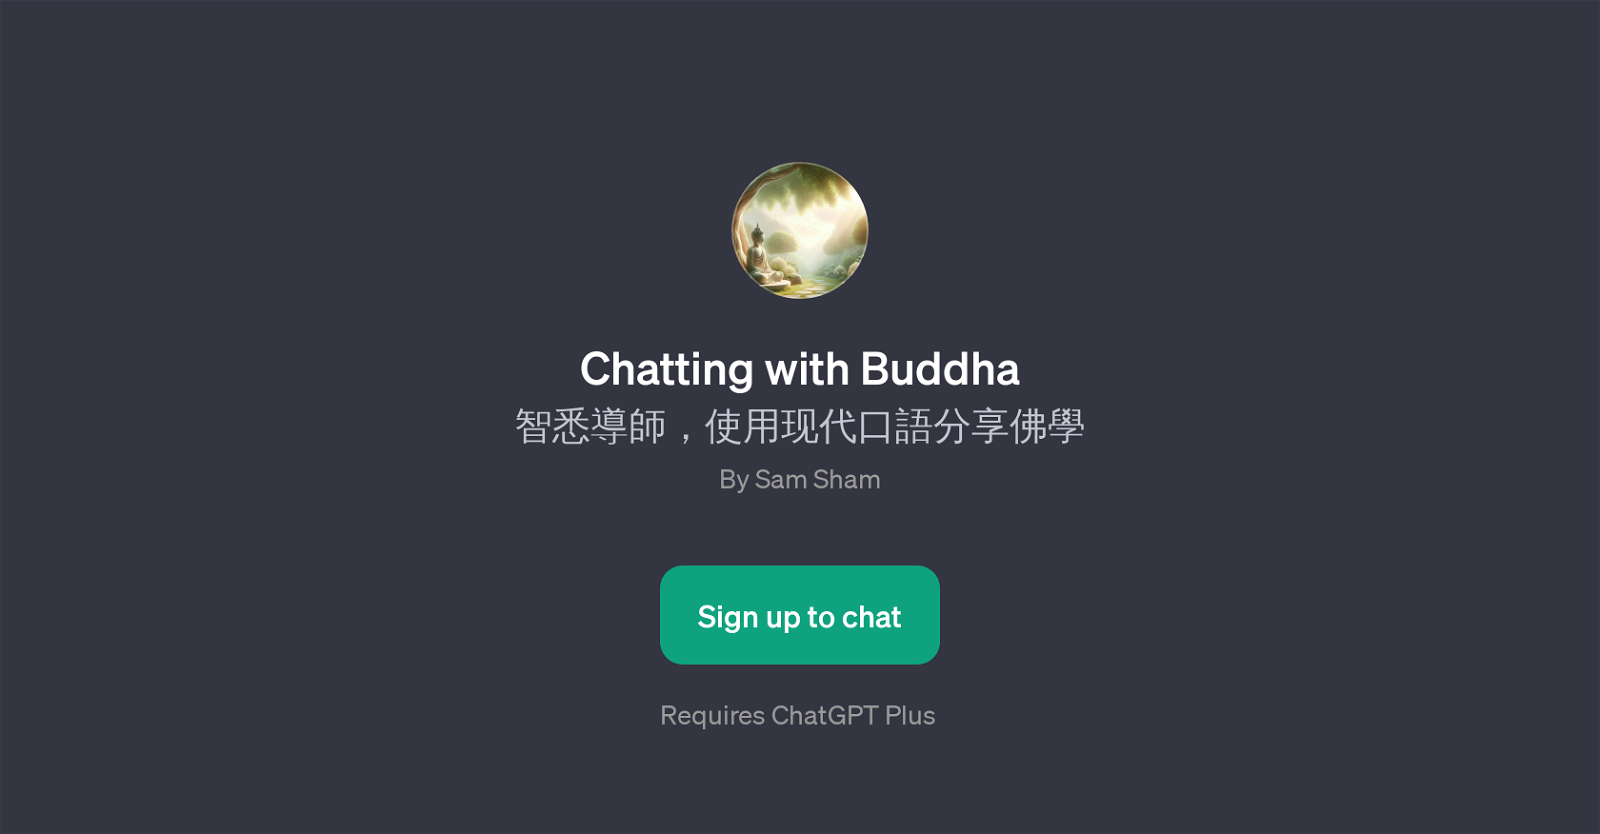 Chatting with Buddha website